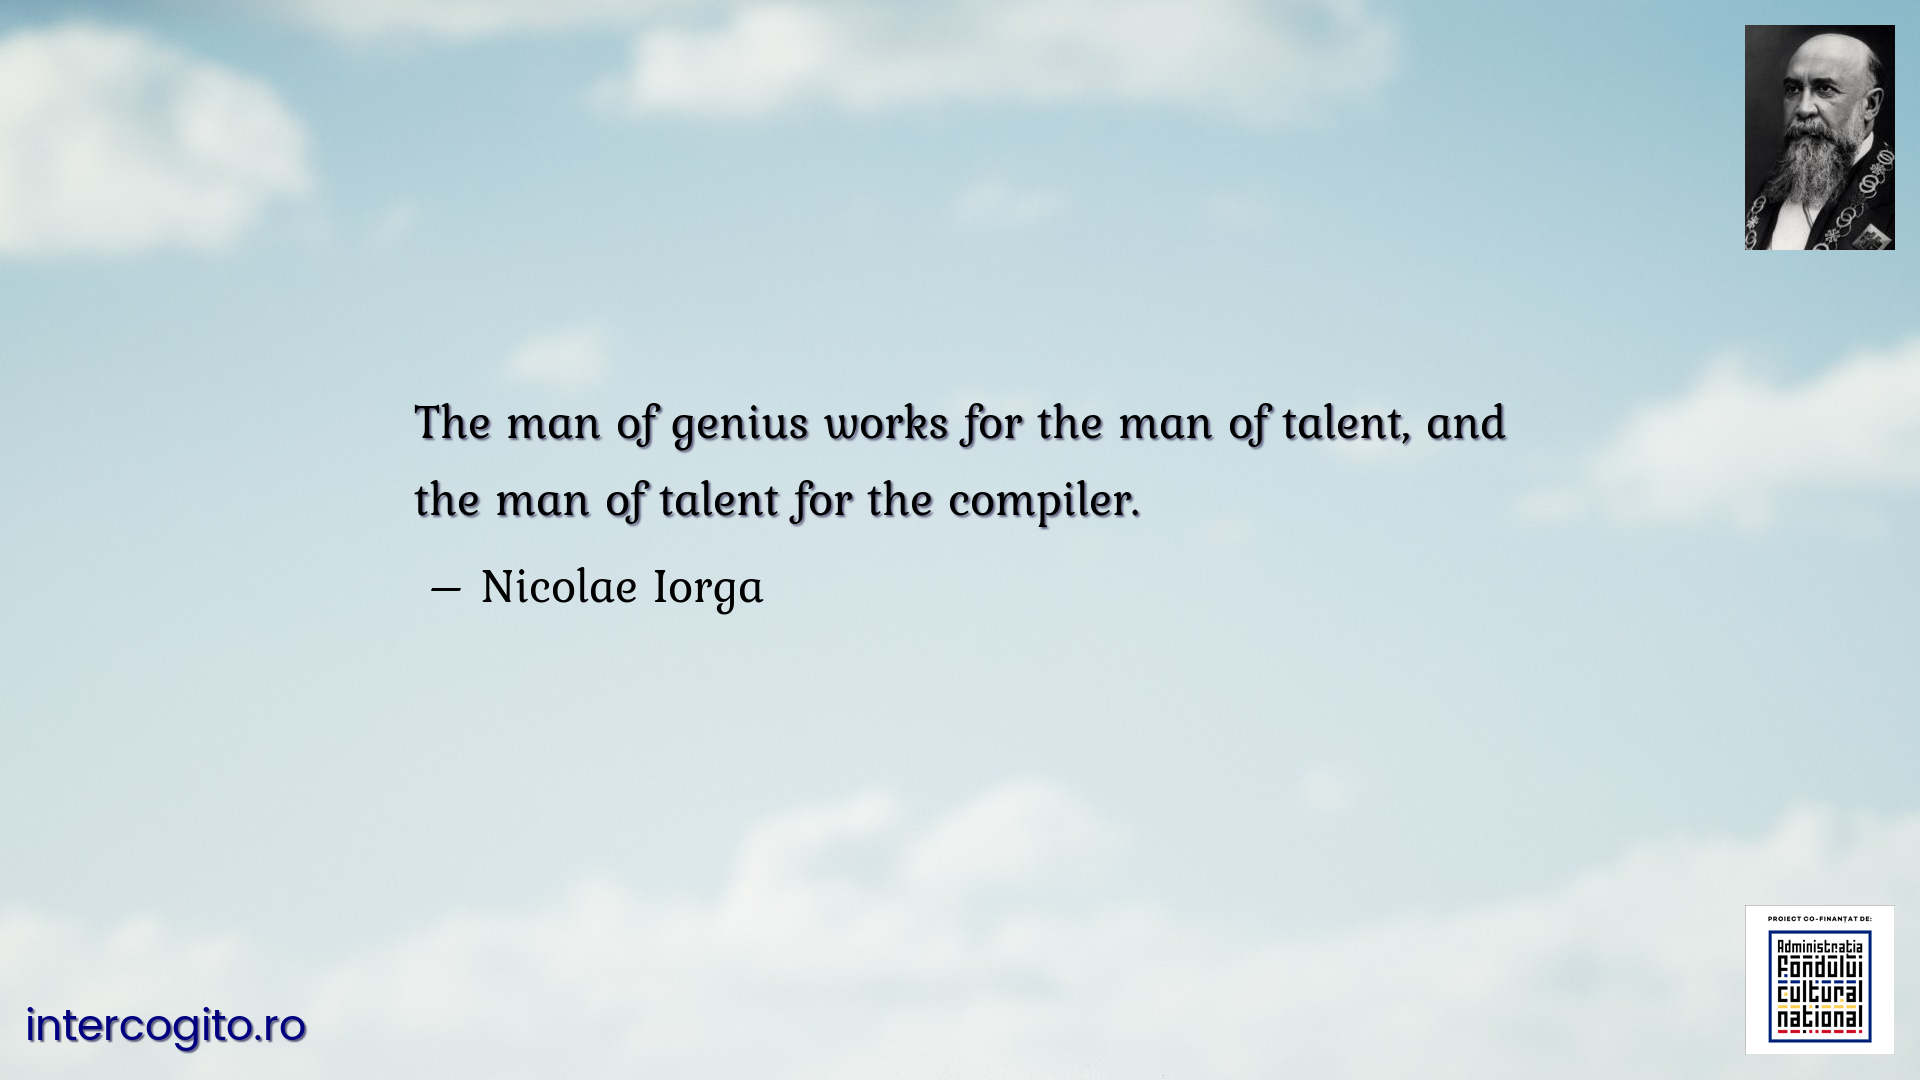 The man of genius works for the man of talent, and the man of talent for the compiler.